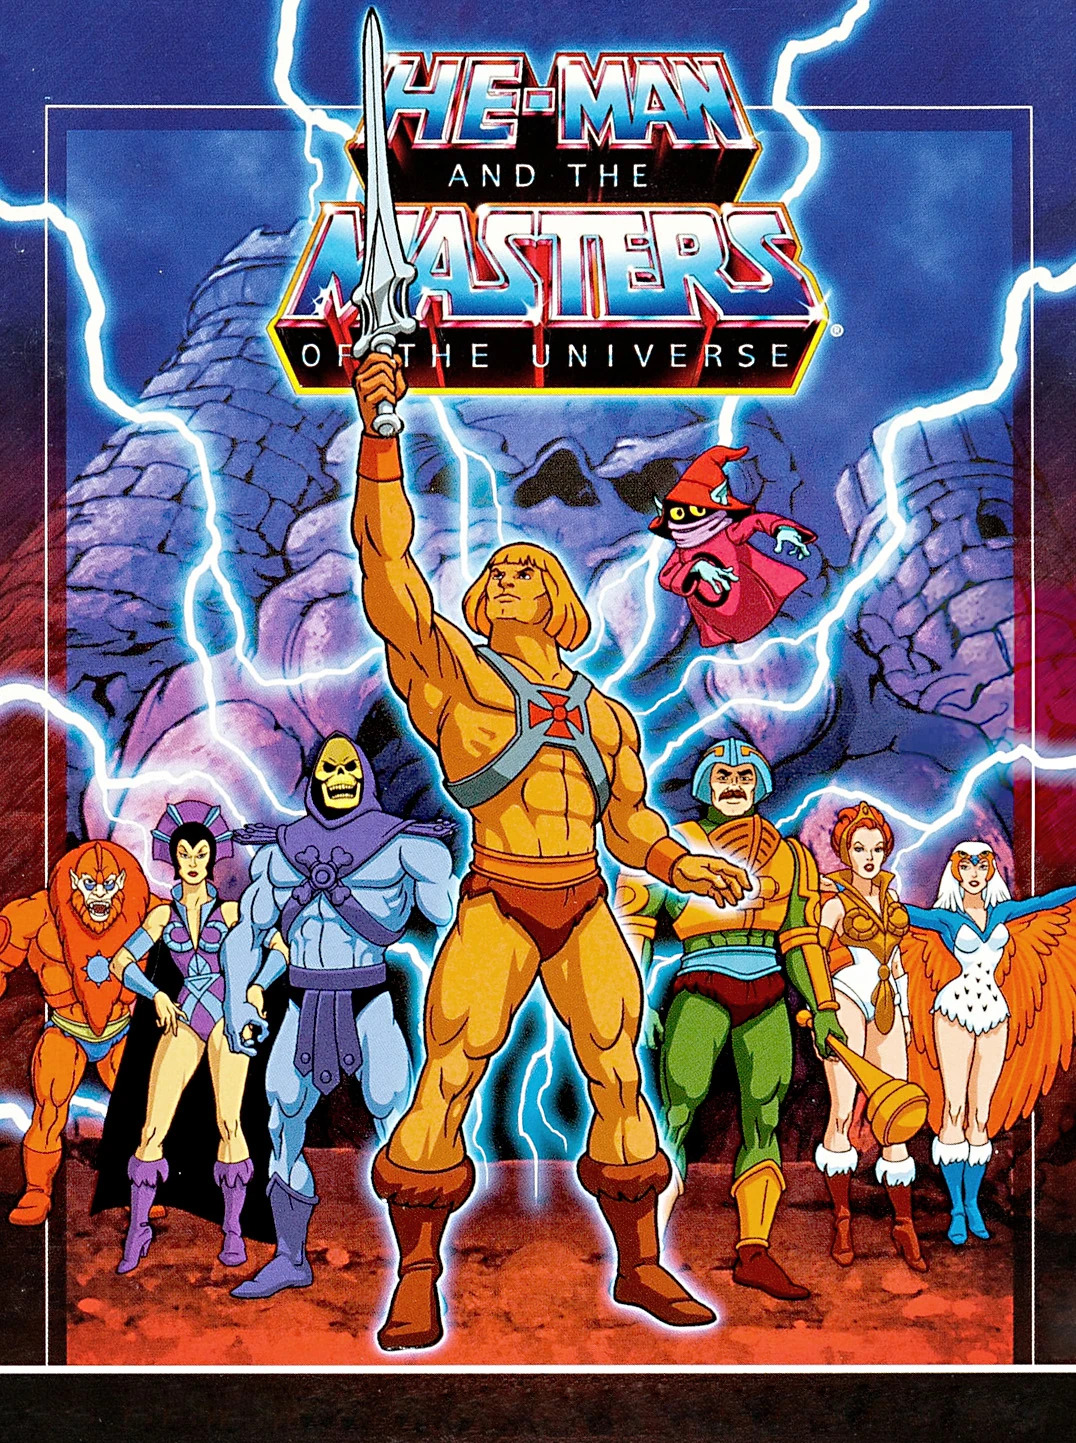 He-Man and the Masters of the Universe (TV Series 1983–1985) - IMDb